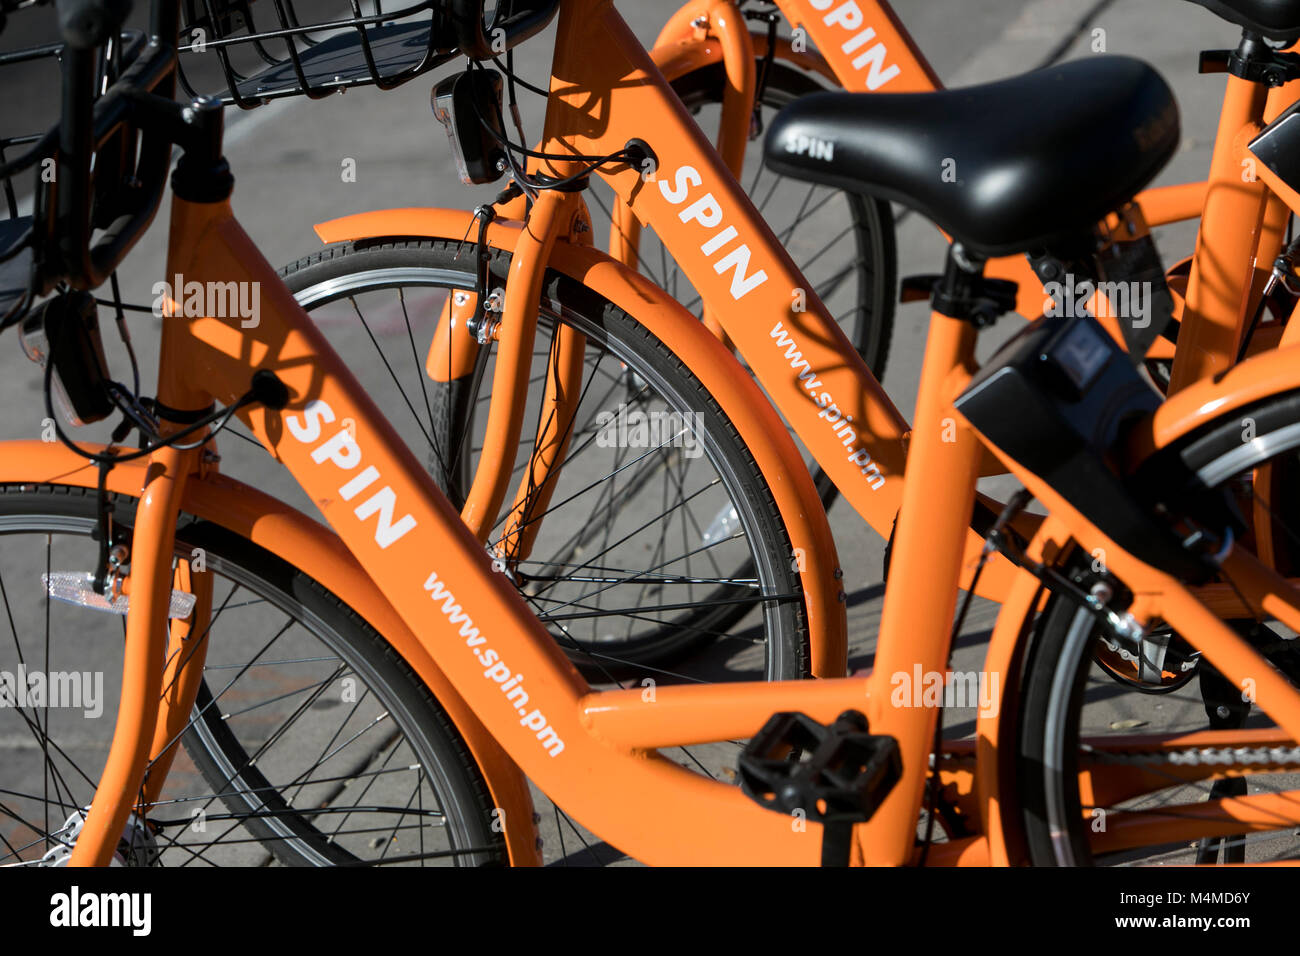 A row of Spin dock-less bicycle-sharing bikes in Tempe, Arizona, on February 3, 2018. Stock Photo